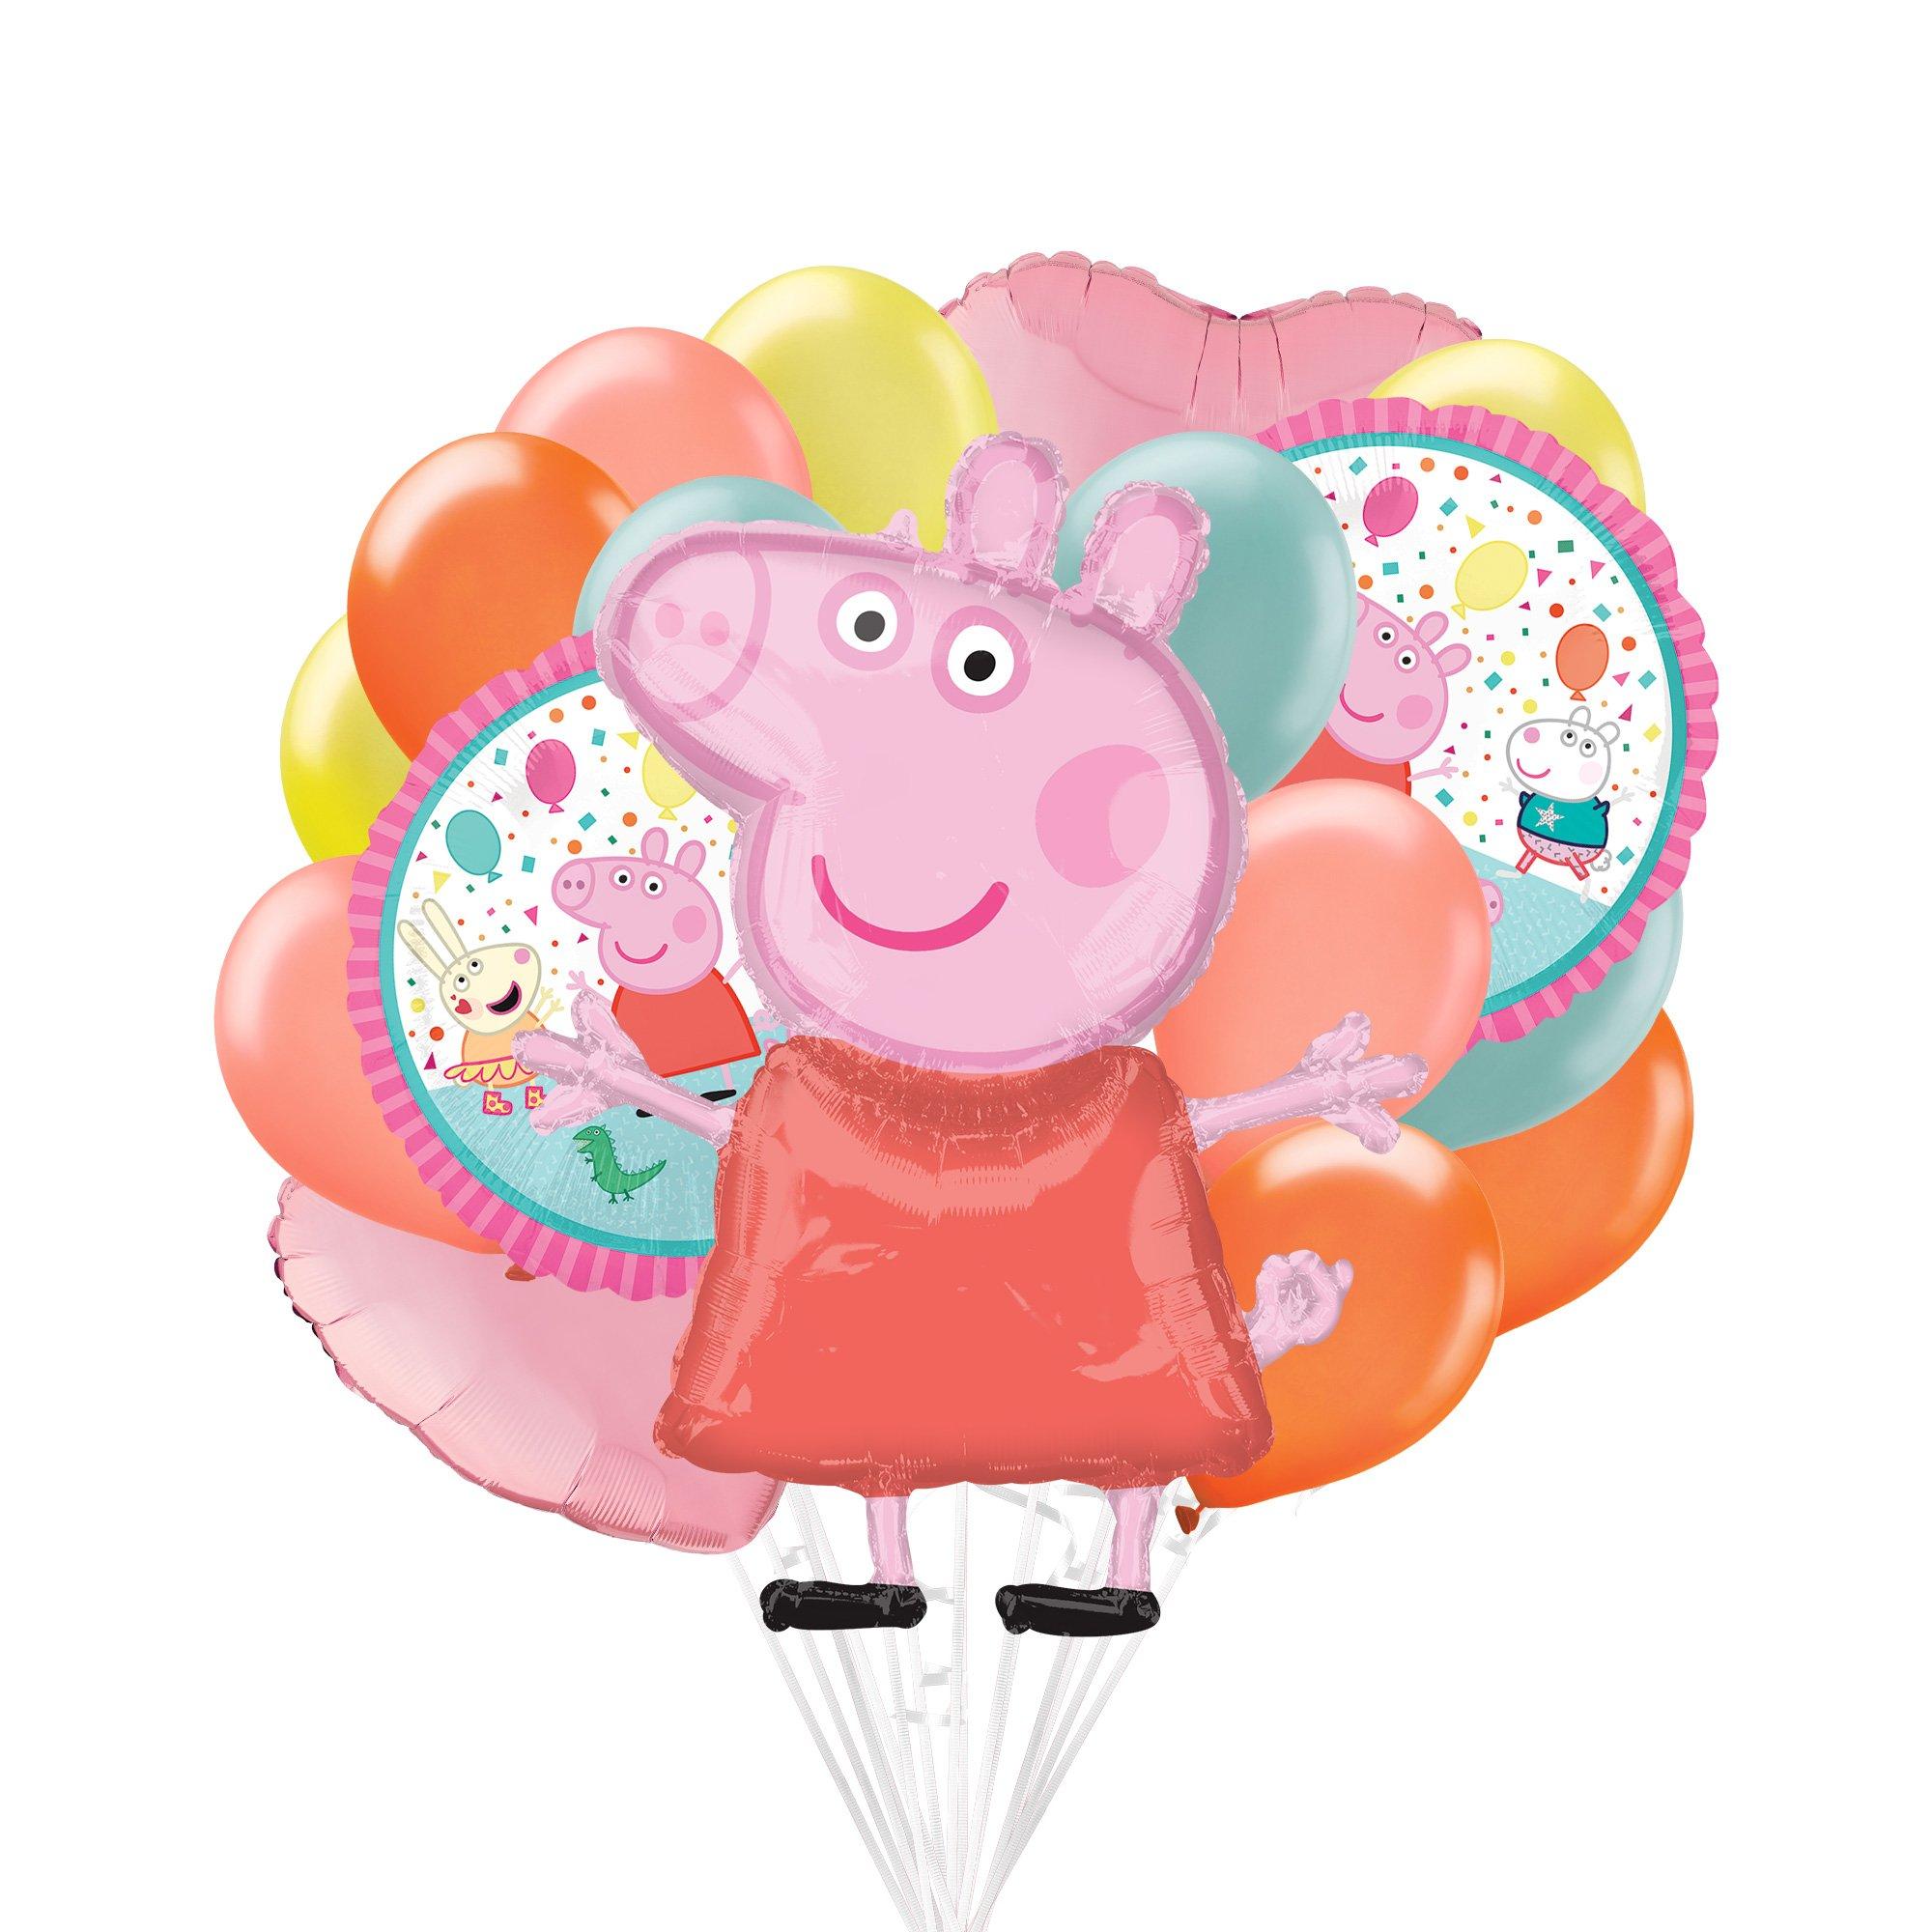 Peppa the Pig Balloons (Extra Deluxe Bouquet) Kids Birthday Balloons